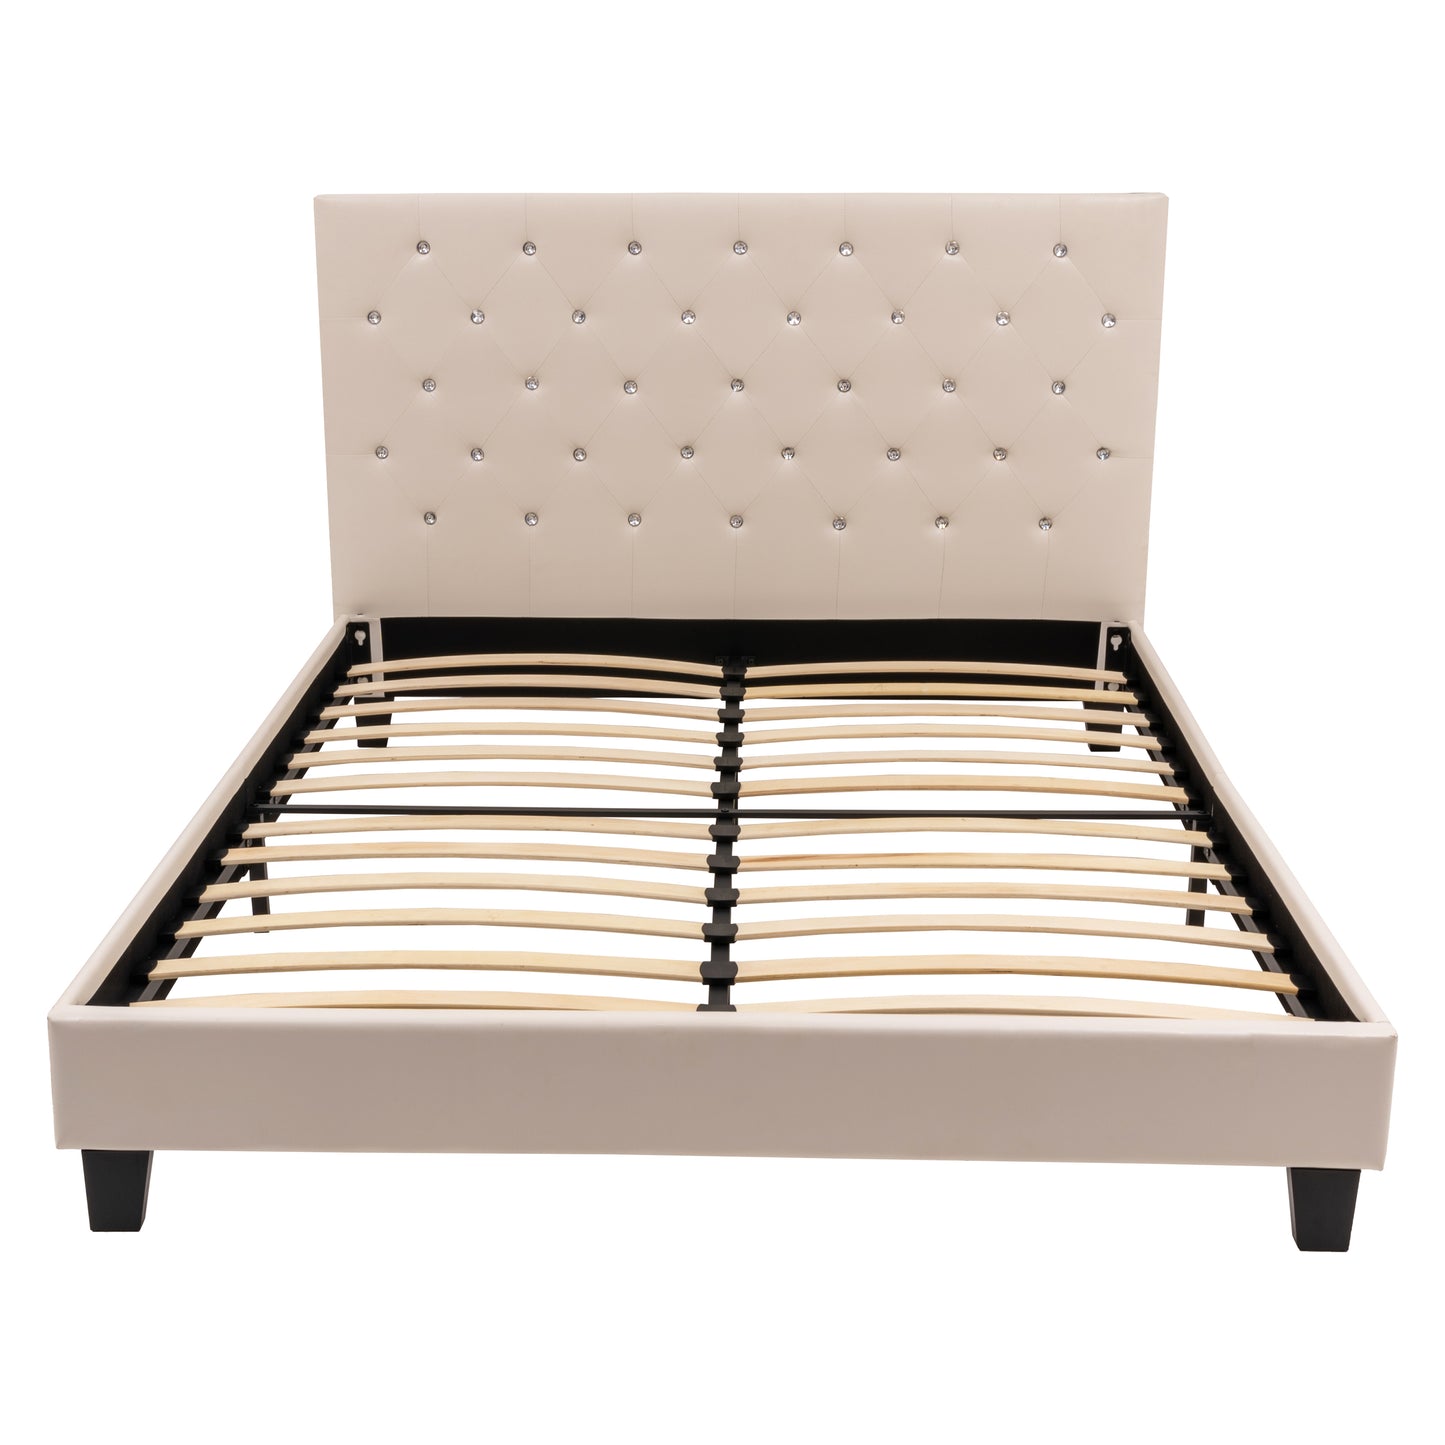 Waytrim wood frame PU leather two-section bed